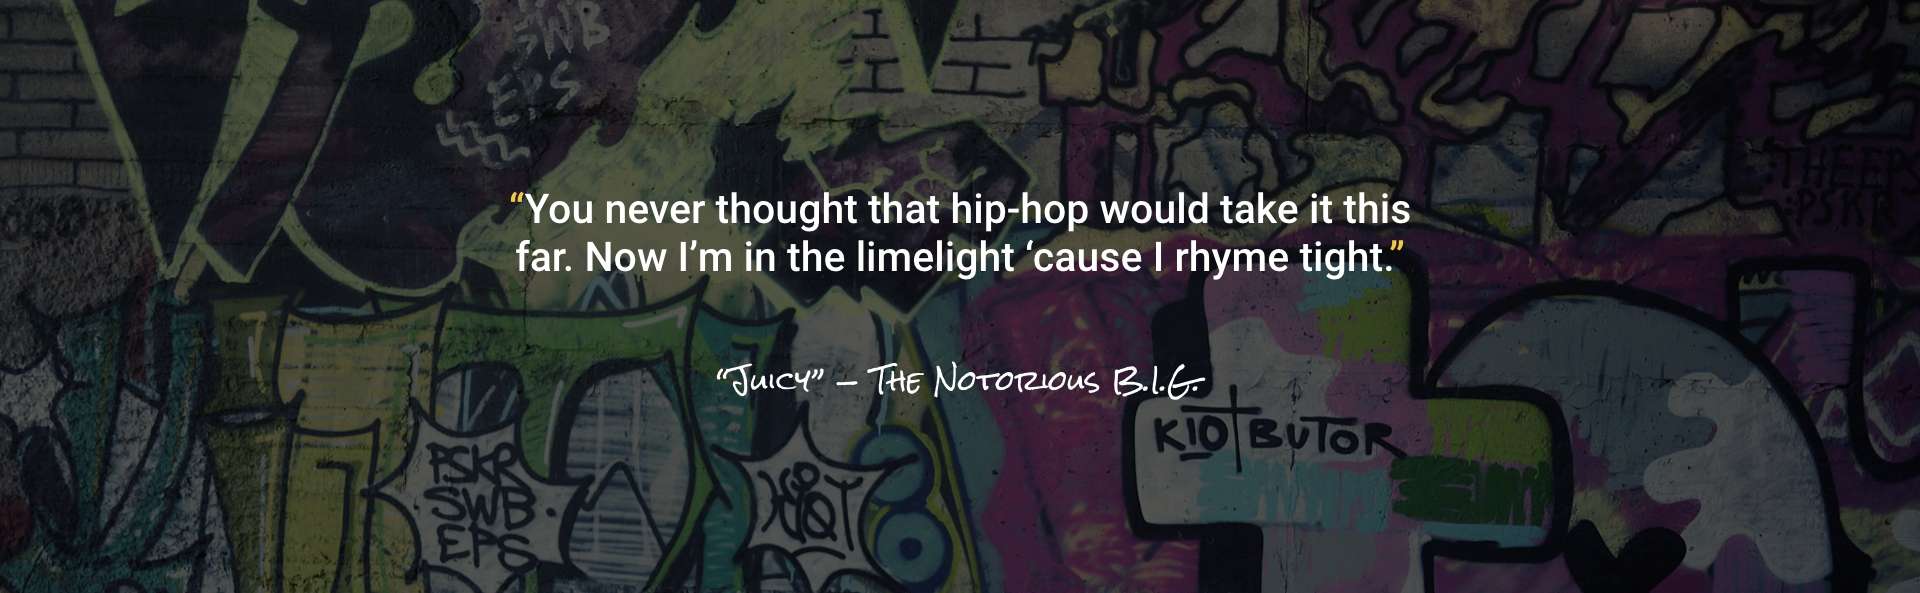 Notorious BIG quote